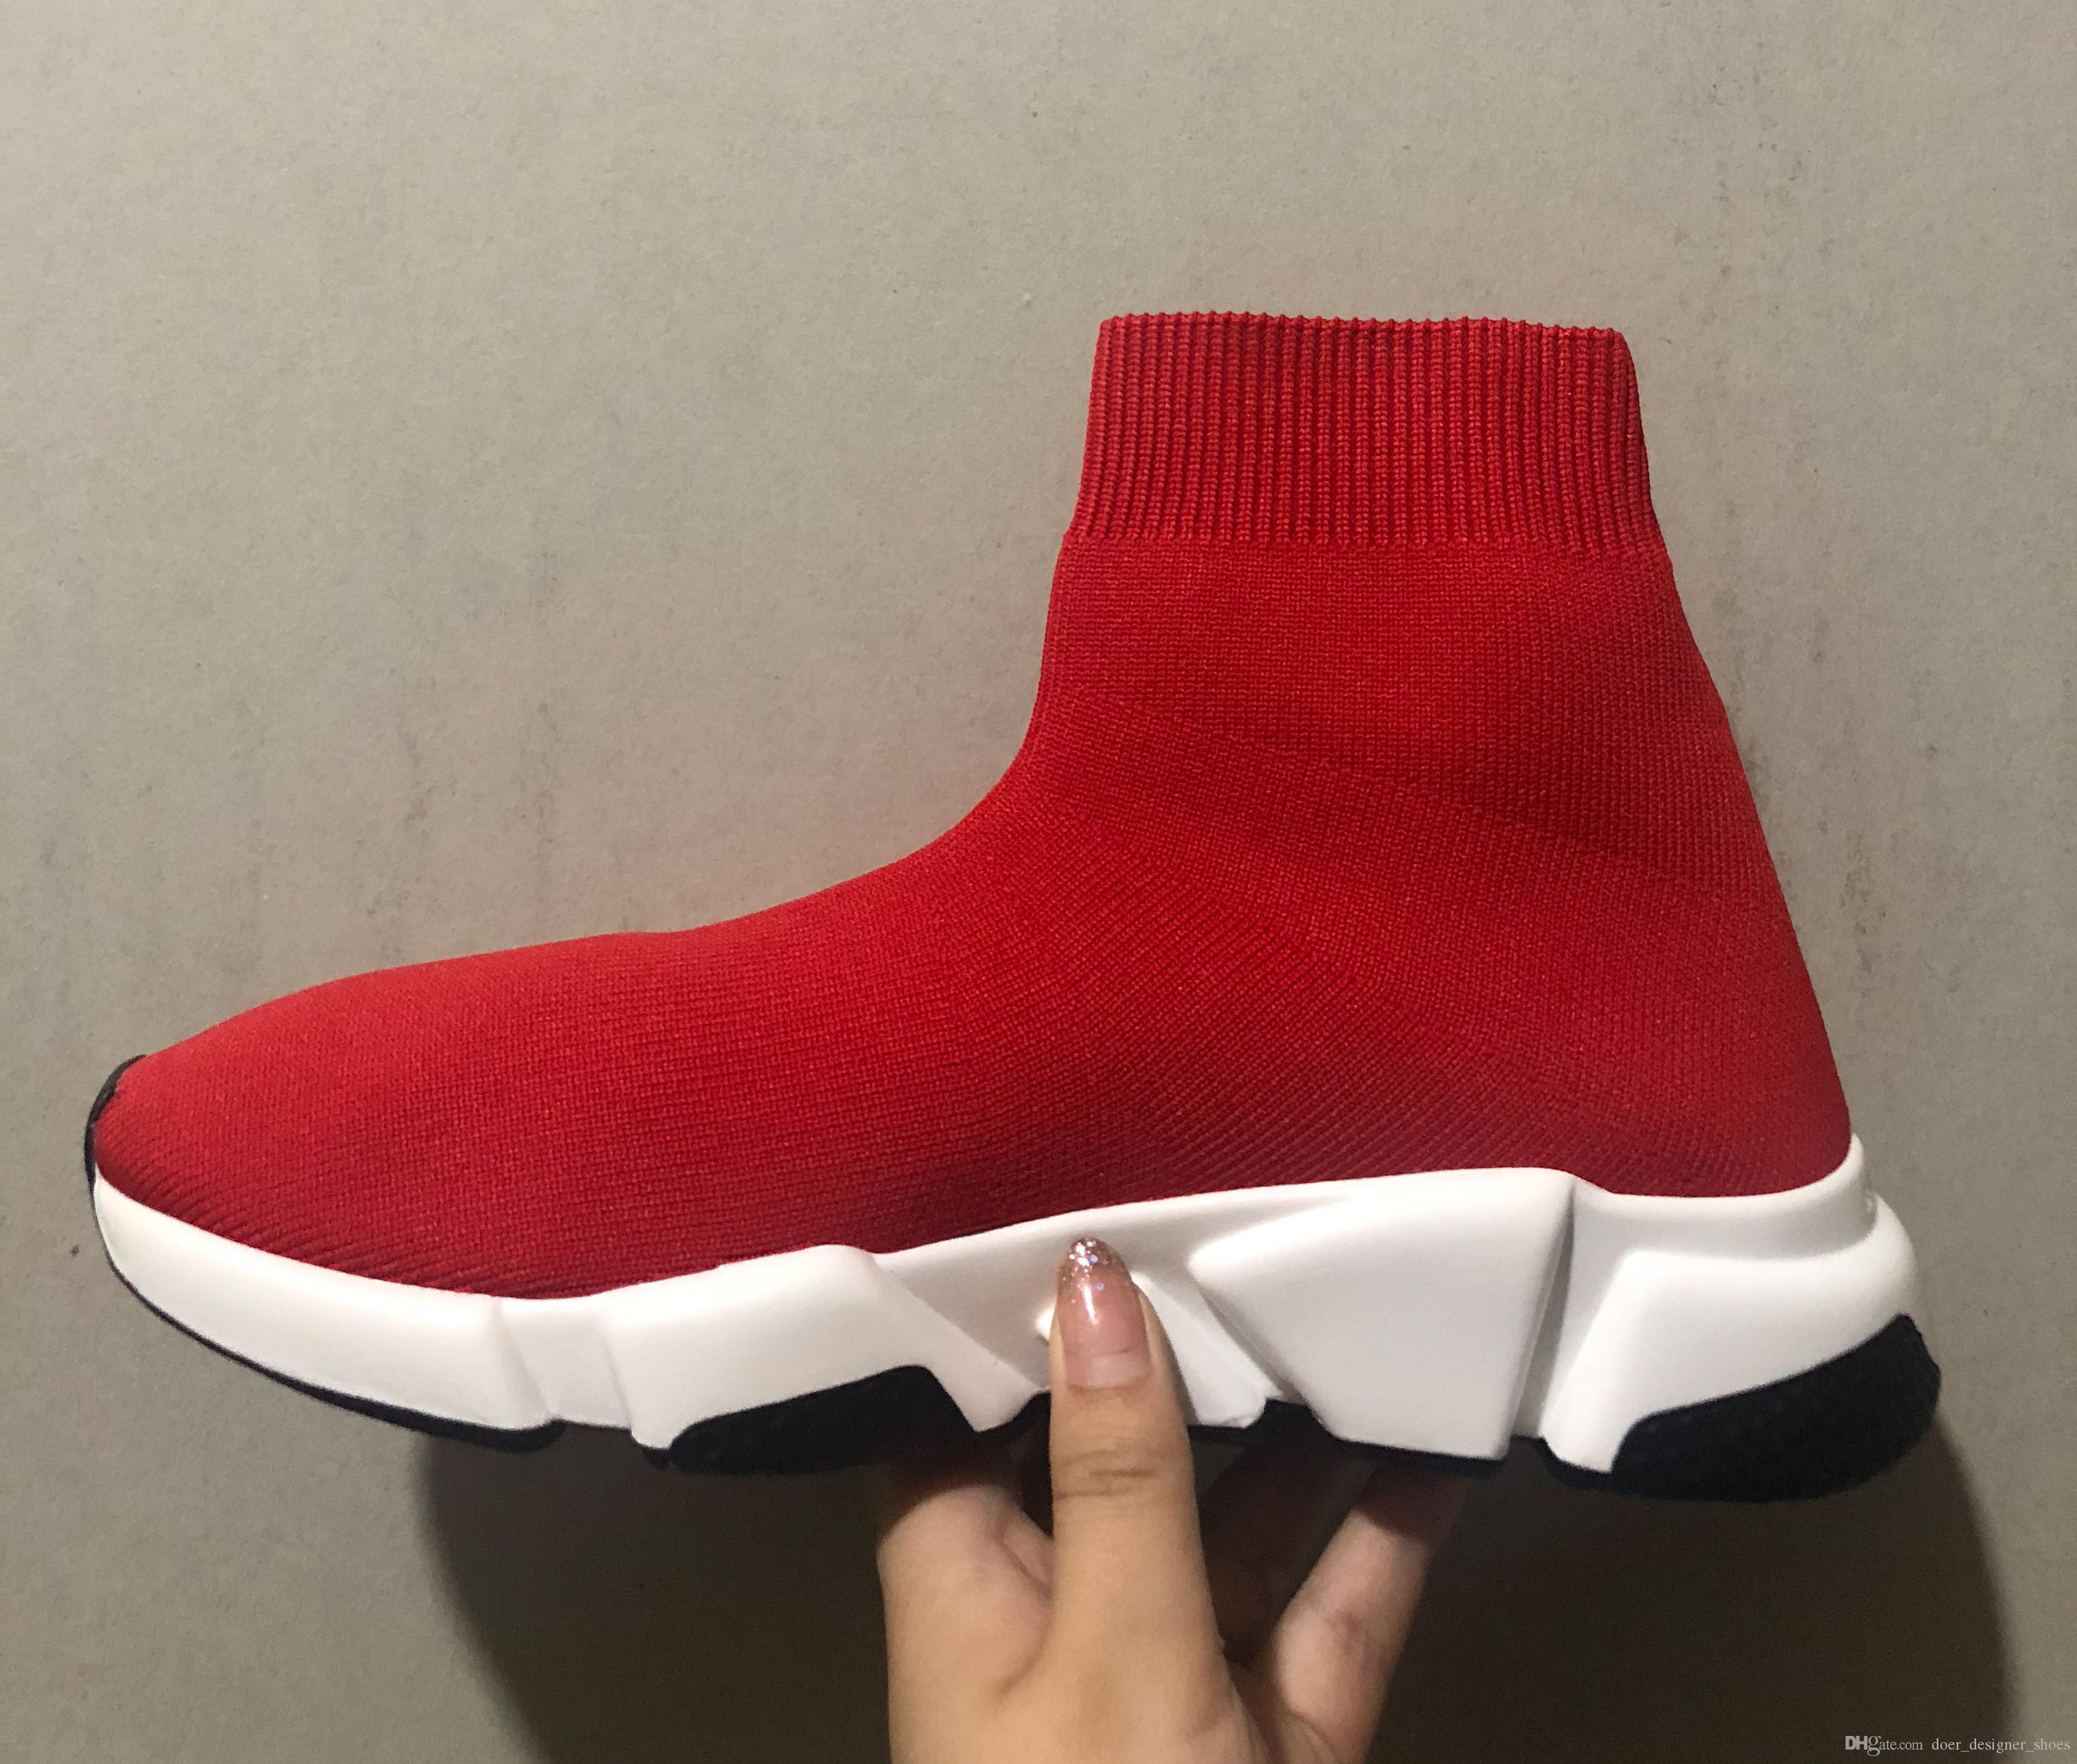 

Fashion designer shoes man women speed knit socks sneakers textured sole red high quality casual shoes, Customize